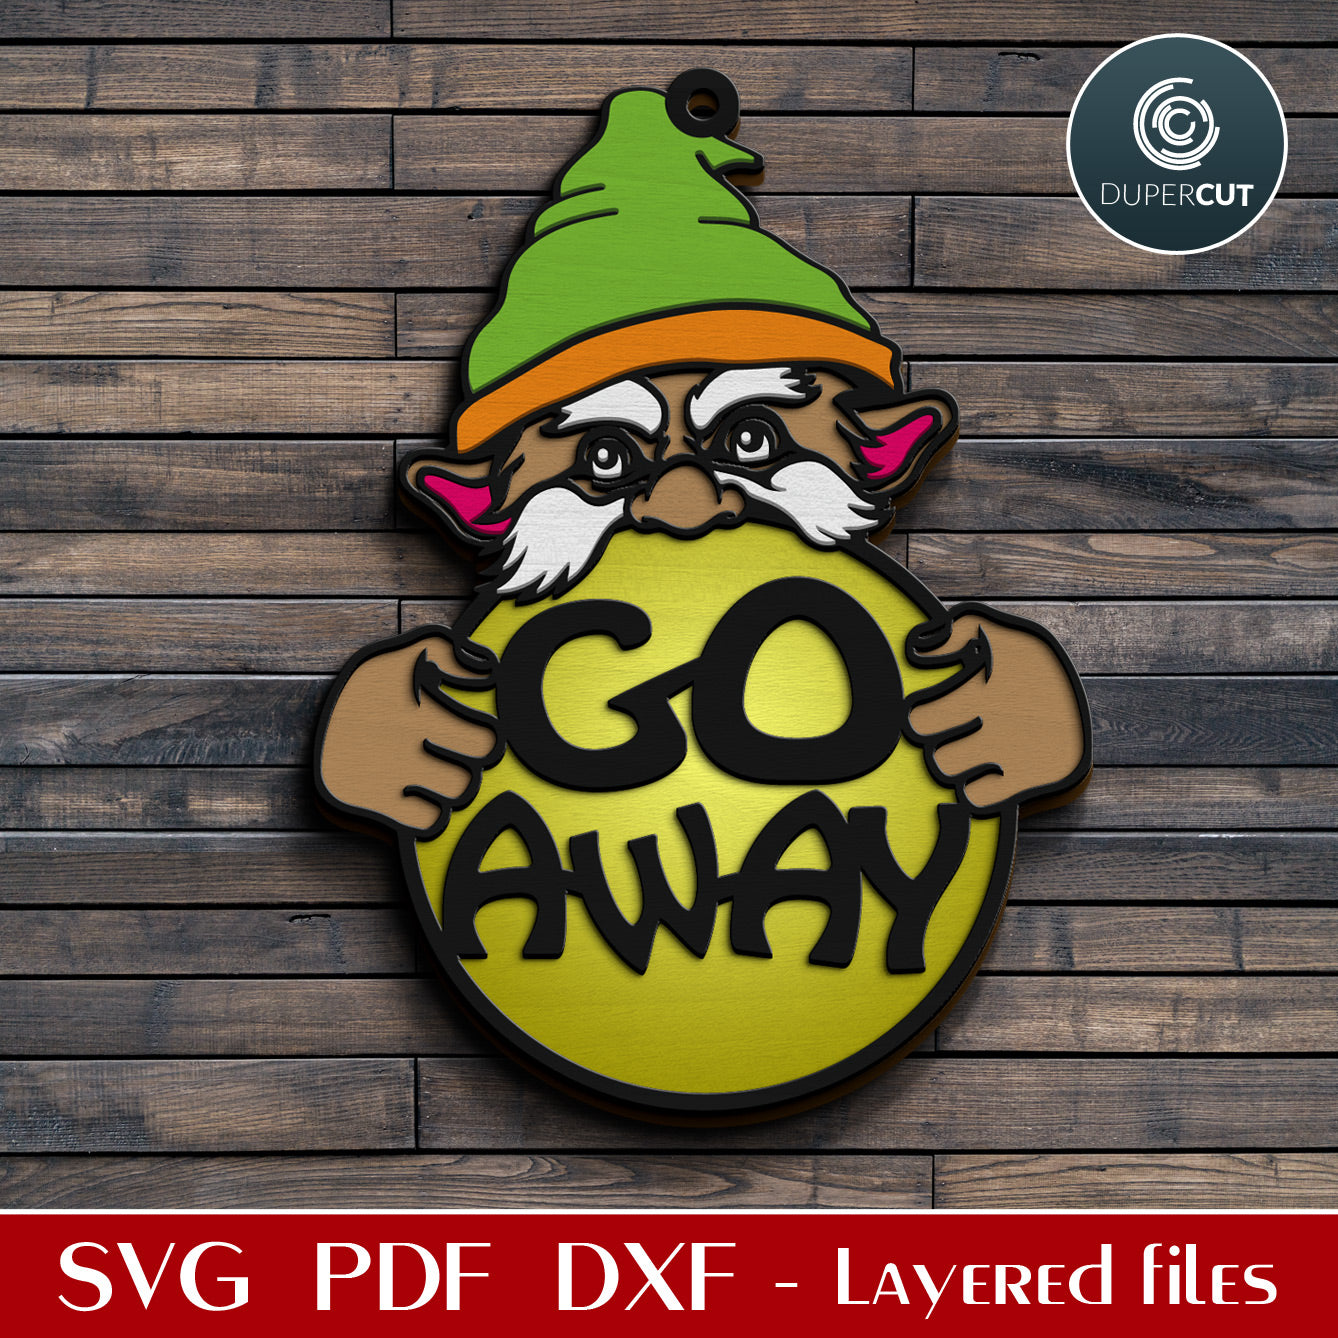 Grumpy Gnome funny Go Away sign door hanger - SVG DXF layered cutting files for Glowforge, Cricut, Silhouette, CNC plasma machines, scroll saw pattern by www.DuperCut.com